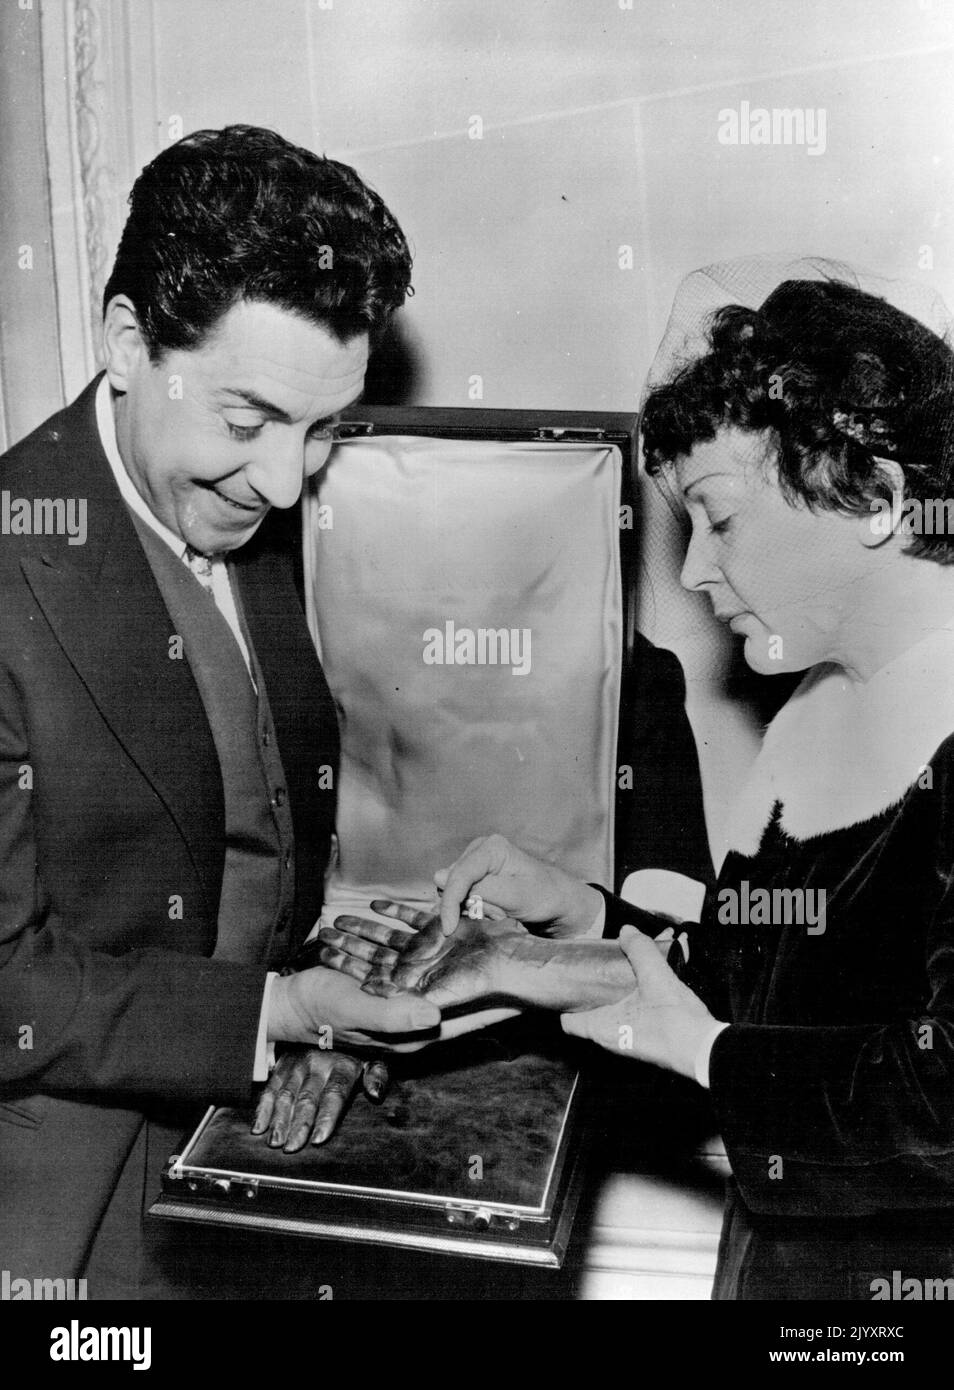 A Hand In Celebration -- Edith Piaf with husband Jacques Pills as they admire their unusual Anniversary gift. Singer Edith Piaf Celebrated Her first wedding anniversary in Paris yesterday. At the Champs-Elysees Pavilion Edith was Presented a Bronze cast of her hands. The presentation was made by the her recording company. The Bronze hands were made by the Chiroteque Francais. January 5, 1954. (Photo by Paul Popper, Paul Popper Ltd.). Stock Photo